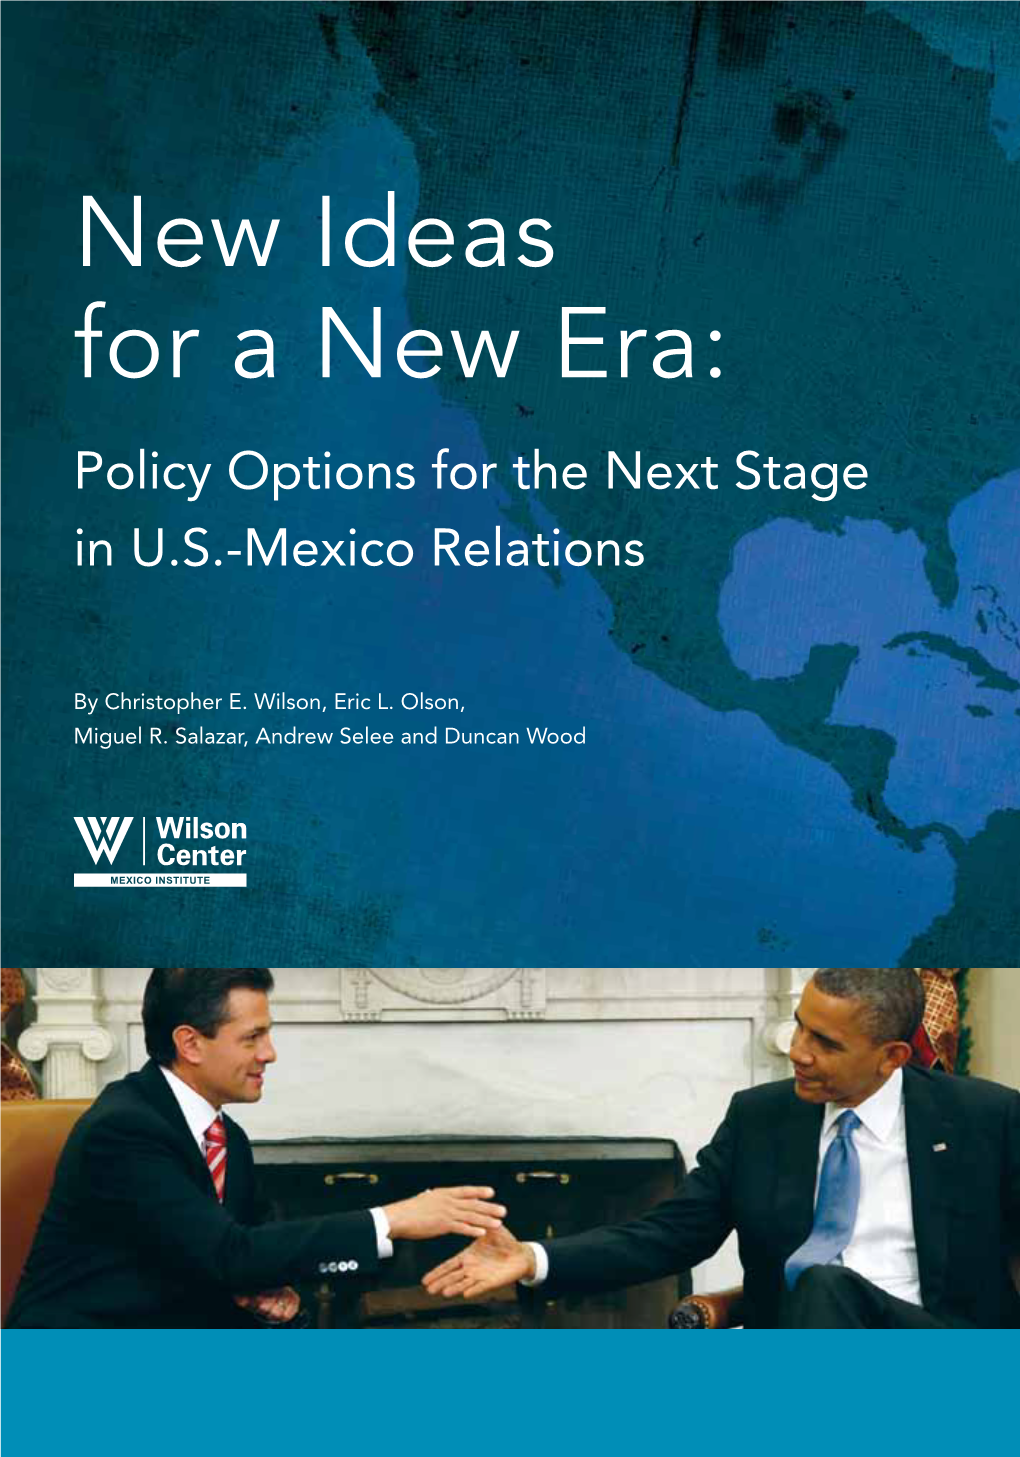 New Ideas for a New Era: Policy Options for the Next Stage in U.S.-Mexico Relations